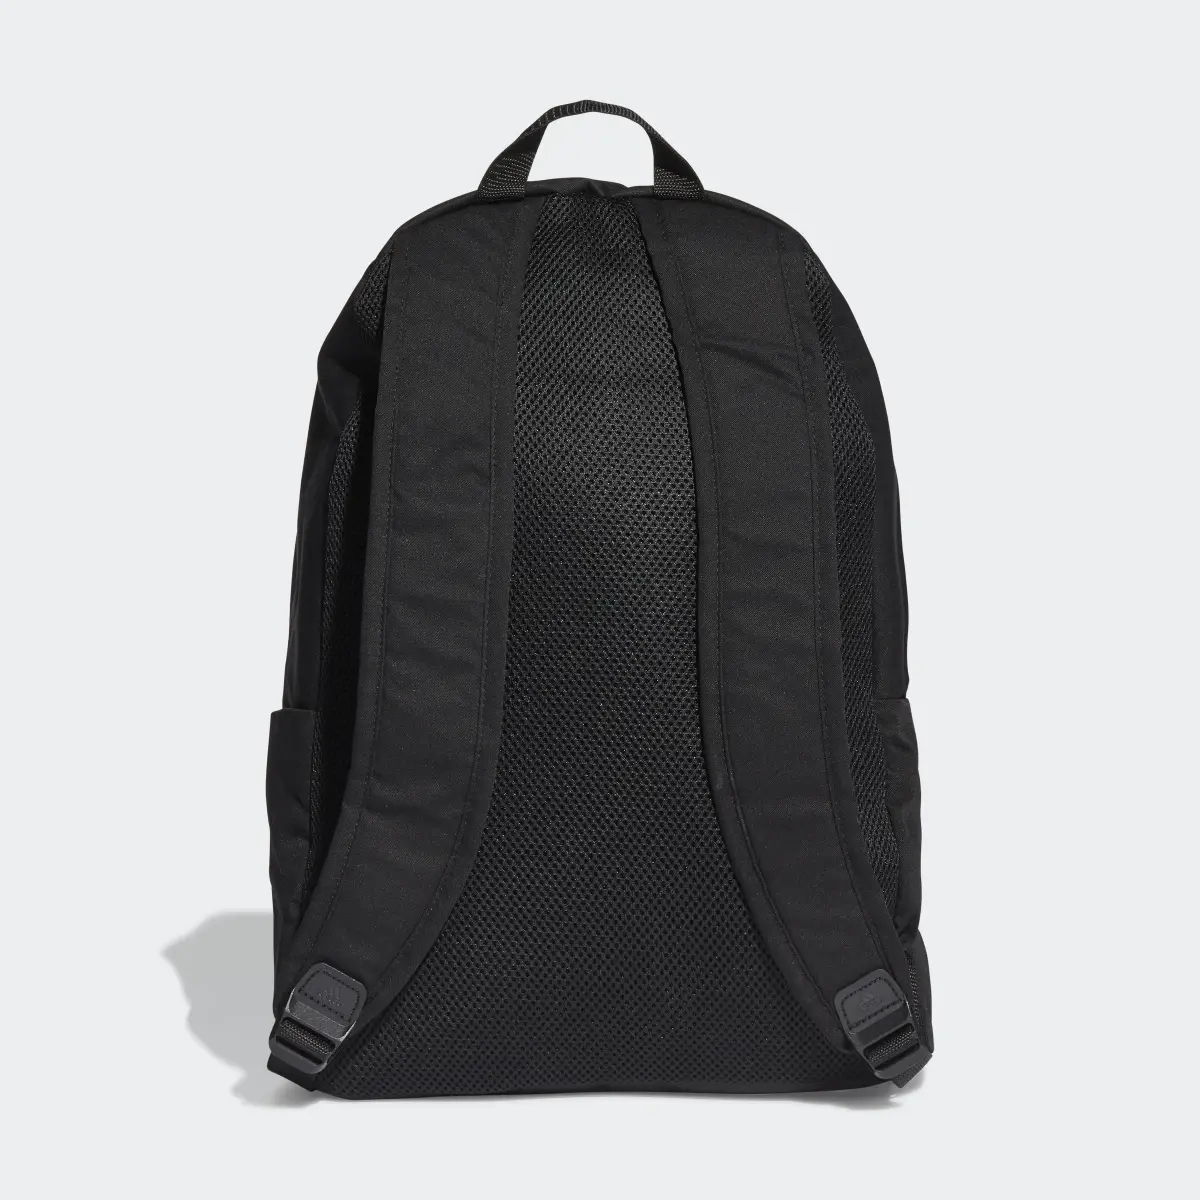 Adidas Classic Fabric Backpack. 3